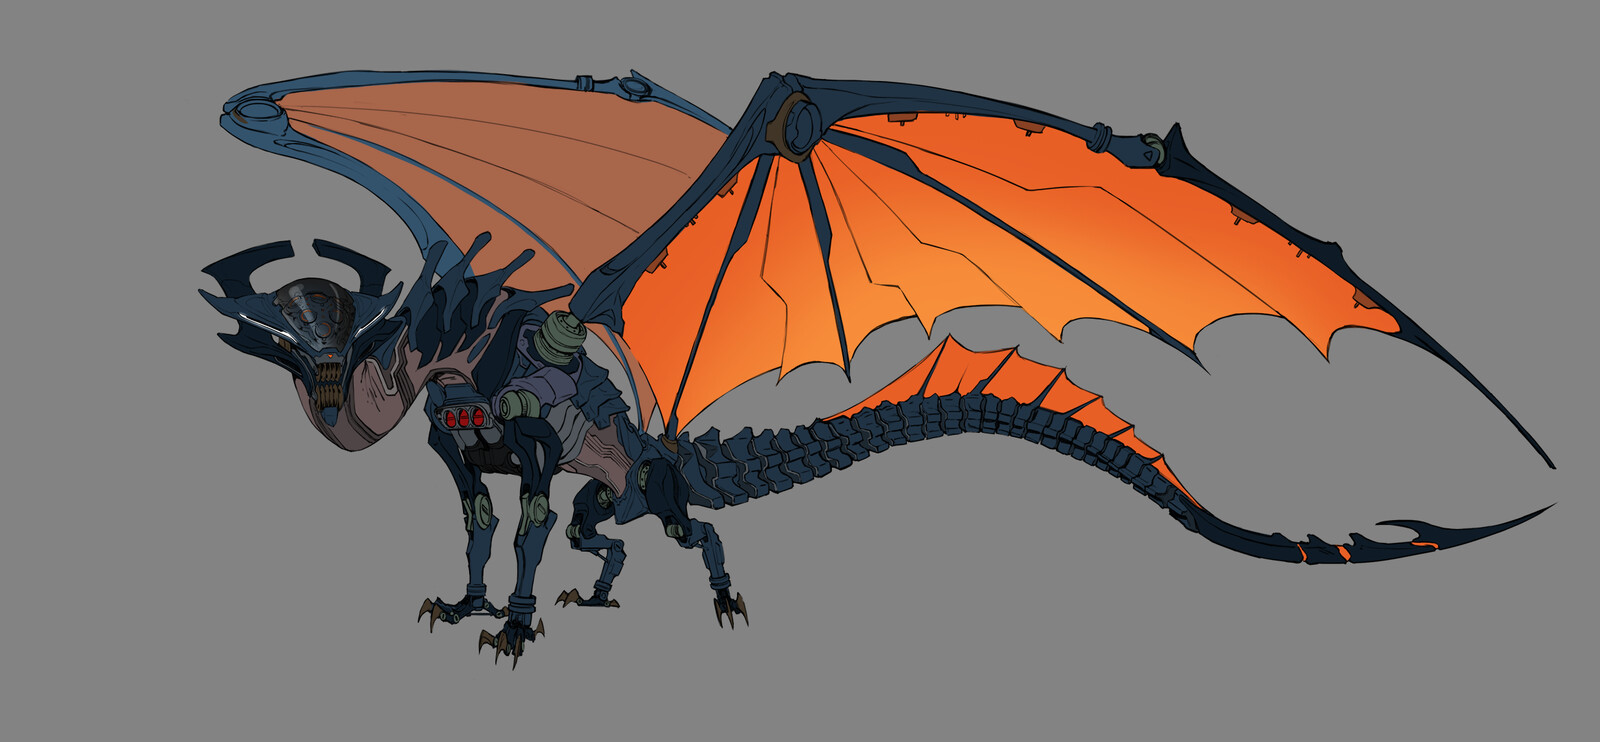 a mechanical dragon, designed and fashioned by the invading force to mimic and over power the natural dragons of the land